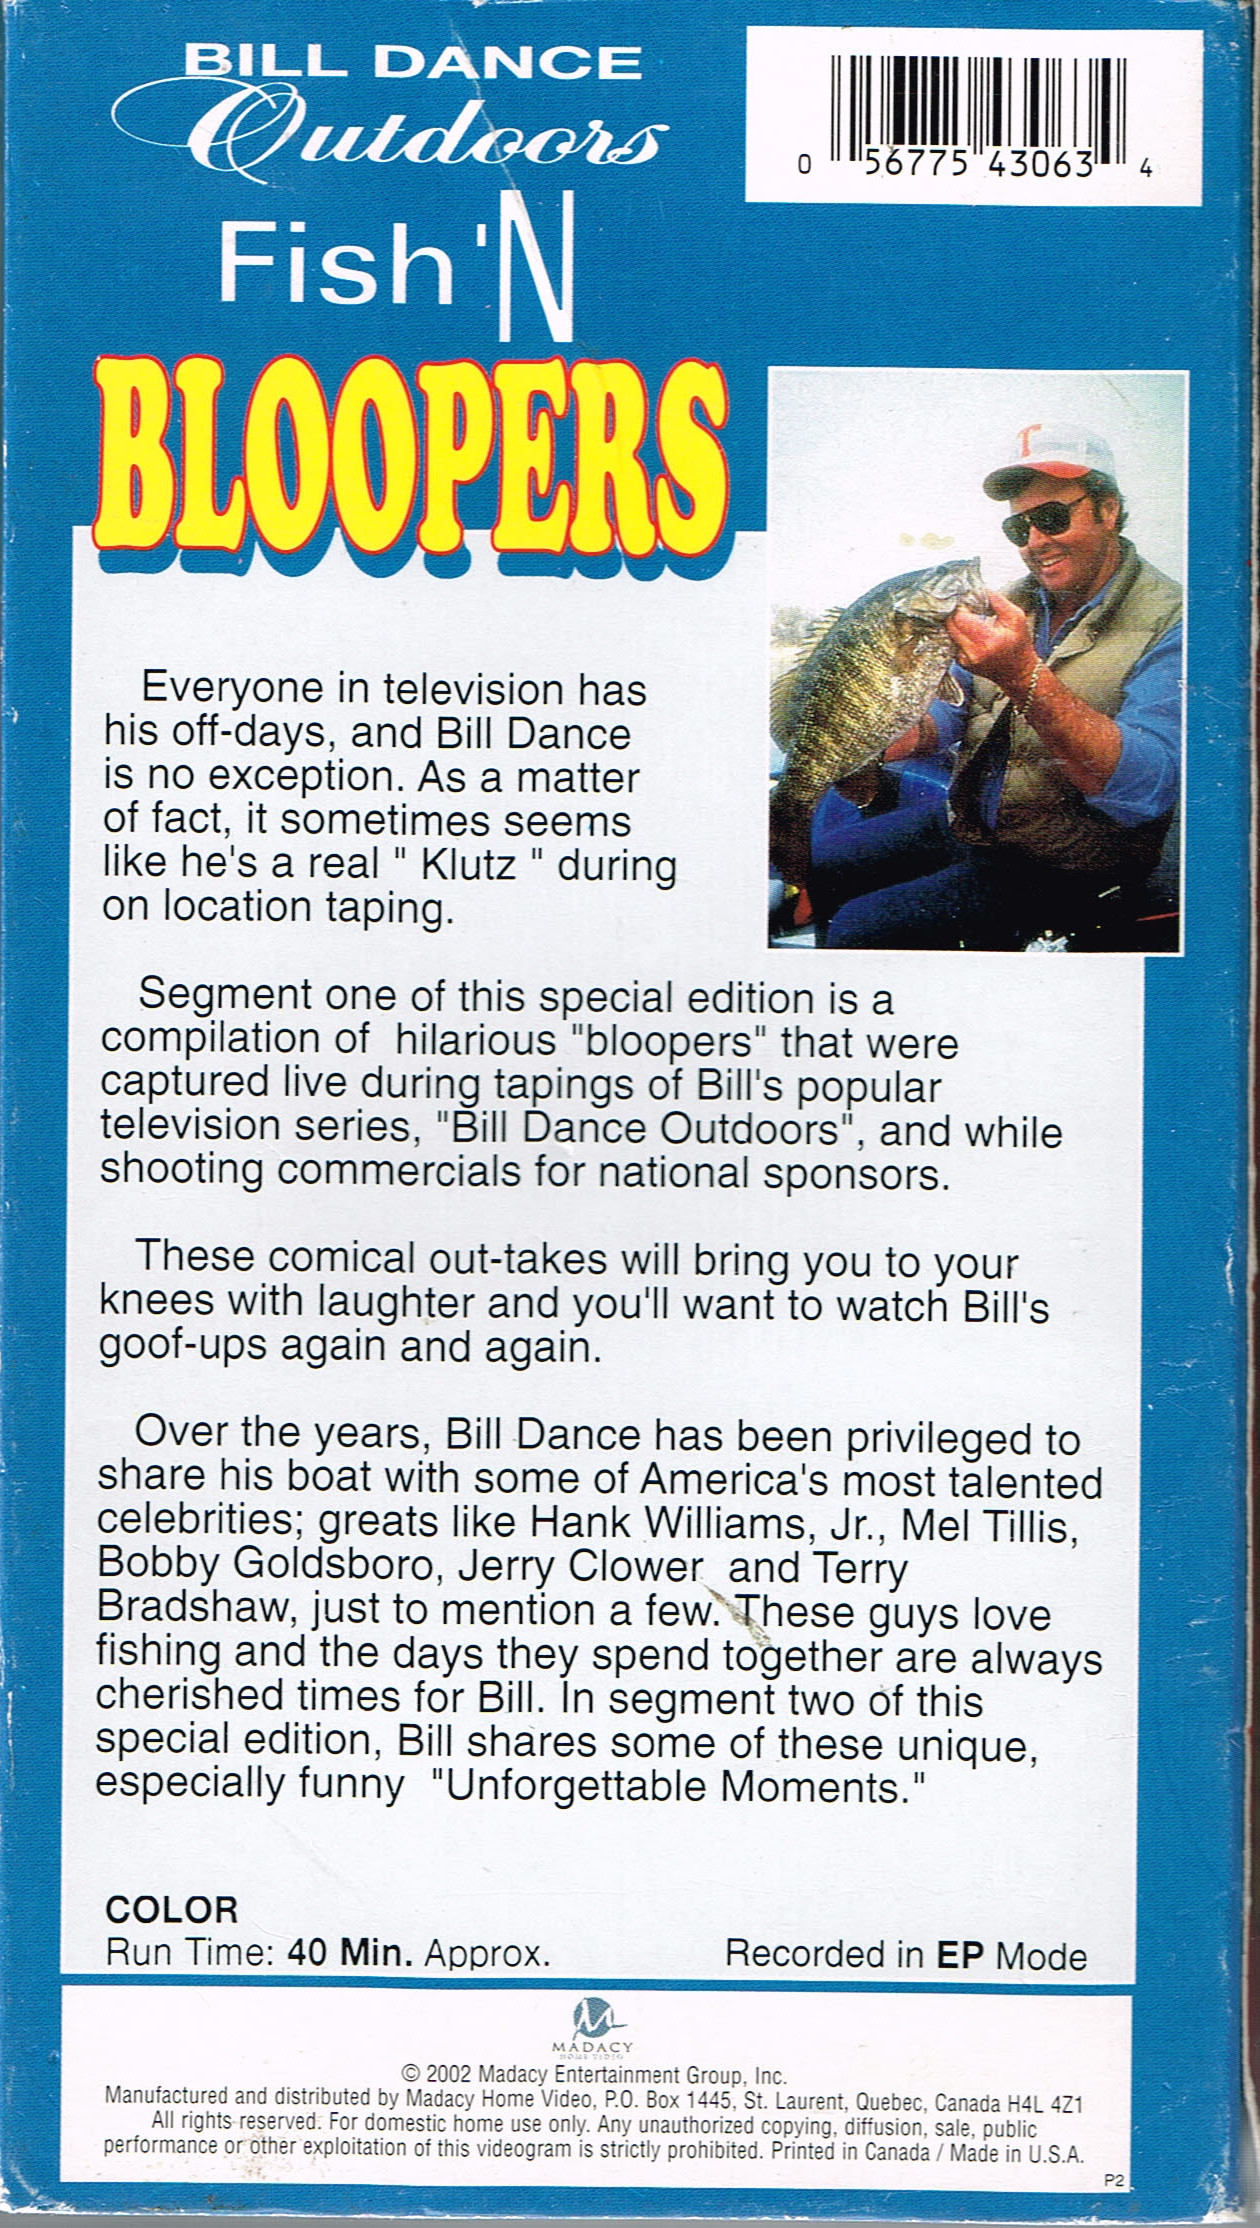 Bill Dance Outdoors: New Bloopers Memorable Moments Vol. 3 SEALED DVD  Fishing 